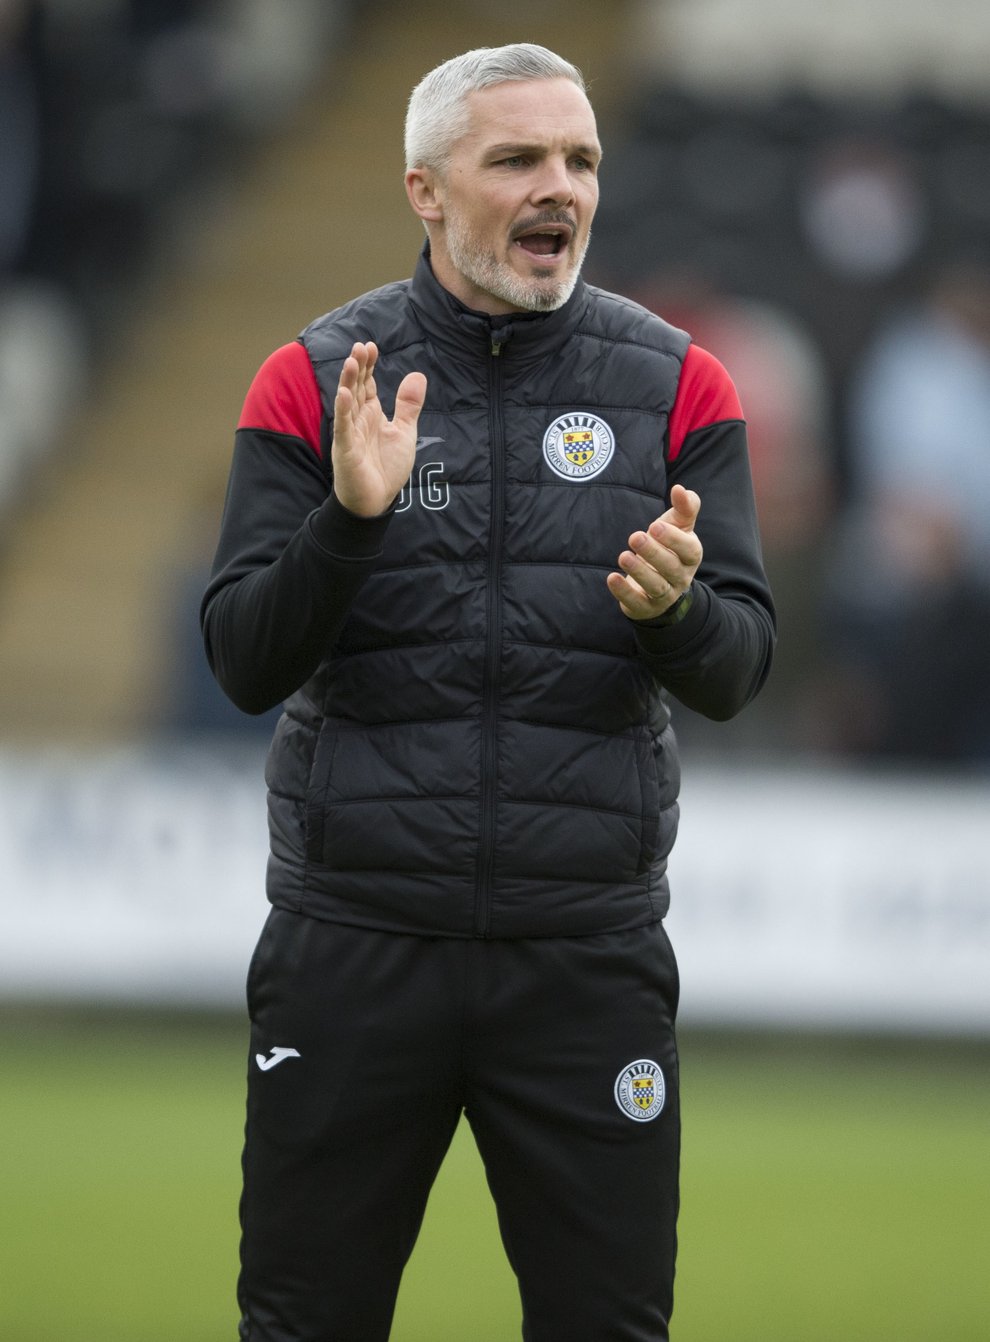 St Mirren manager Jim Goodwin will be taking no risks with his team selection when Morton come to town